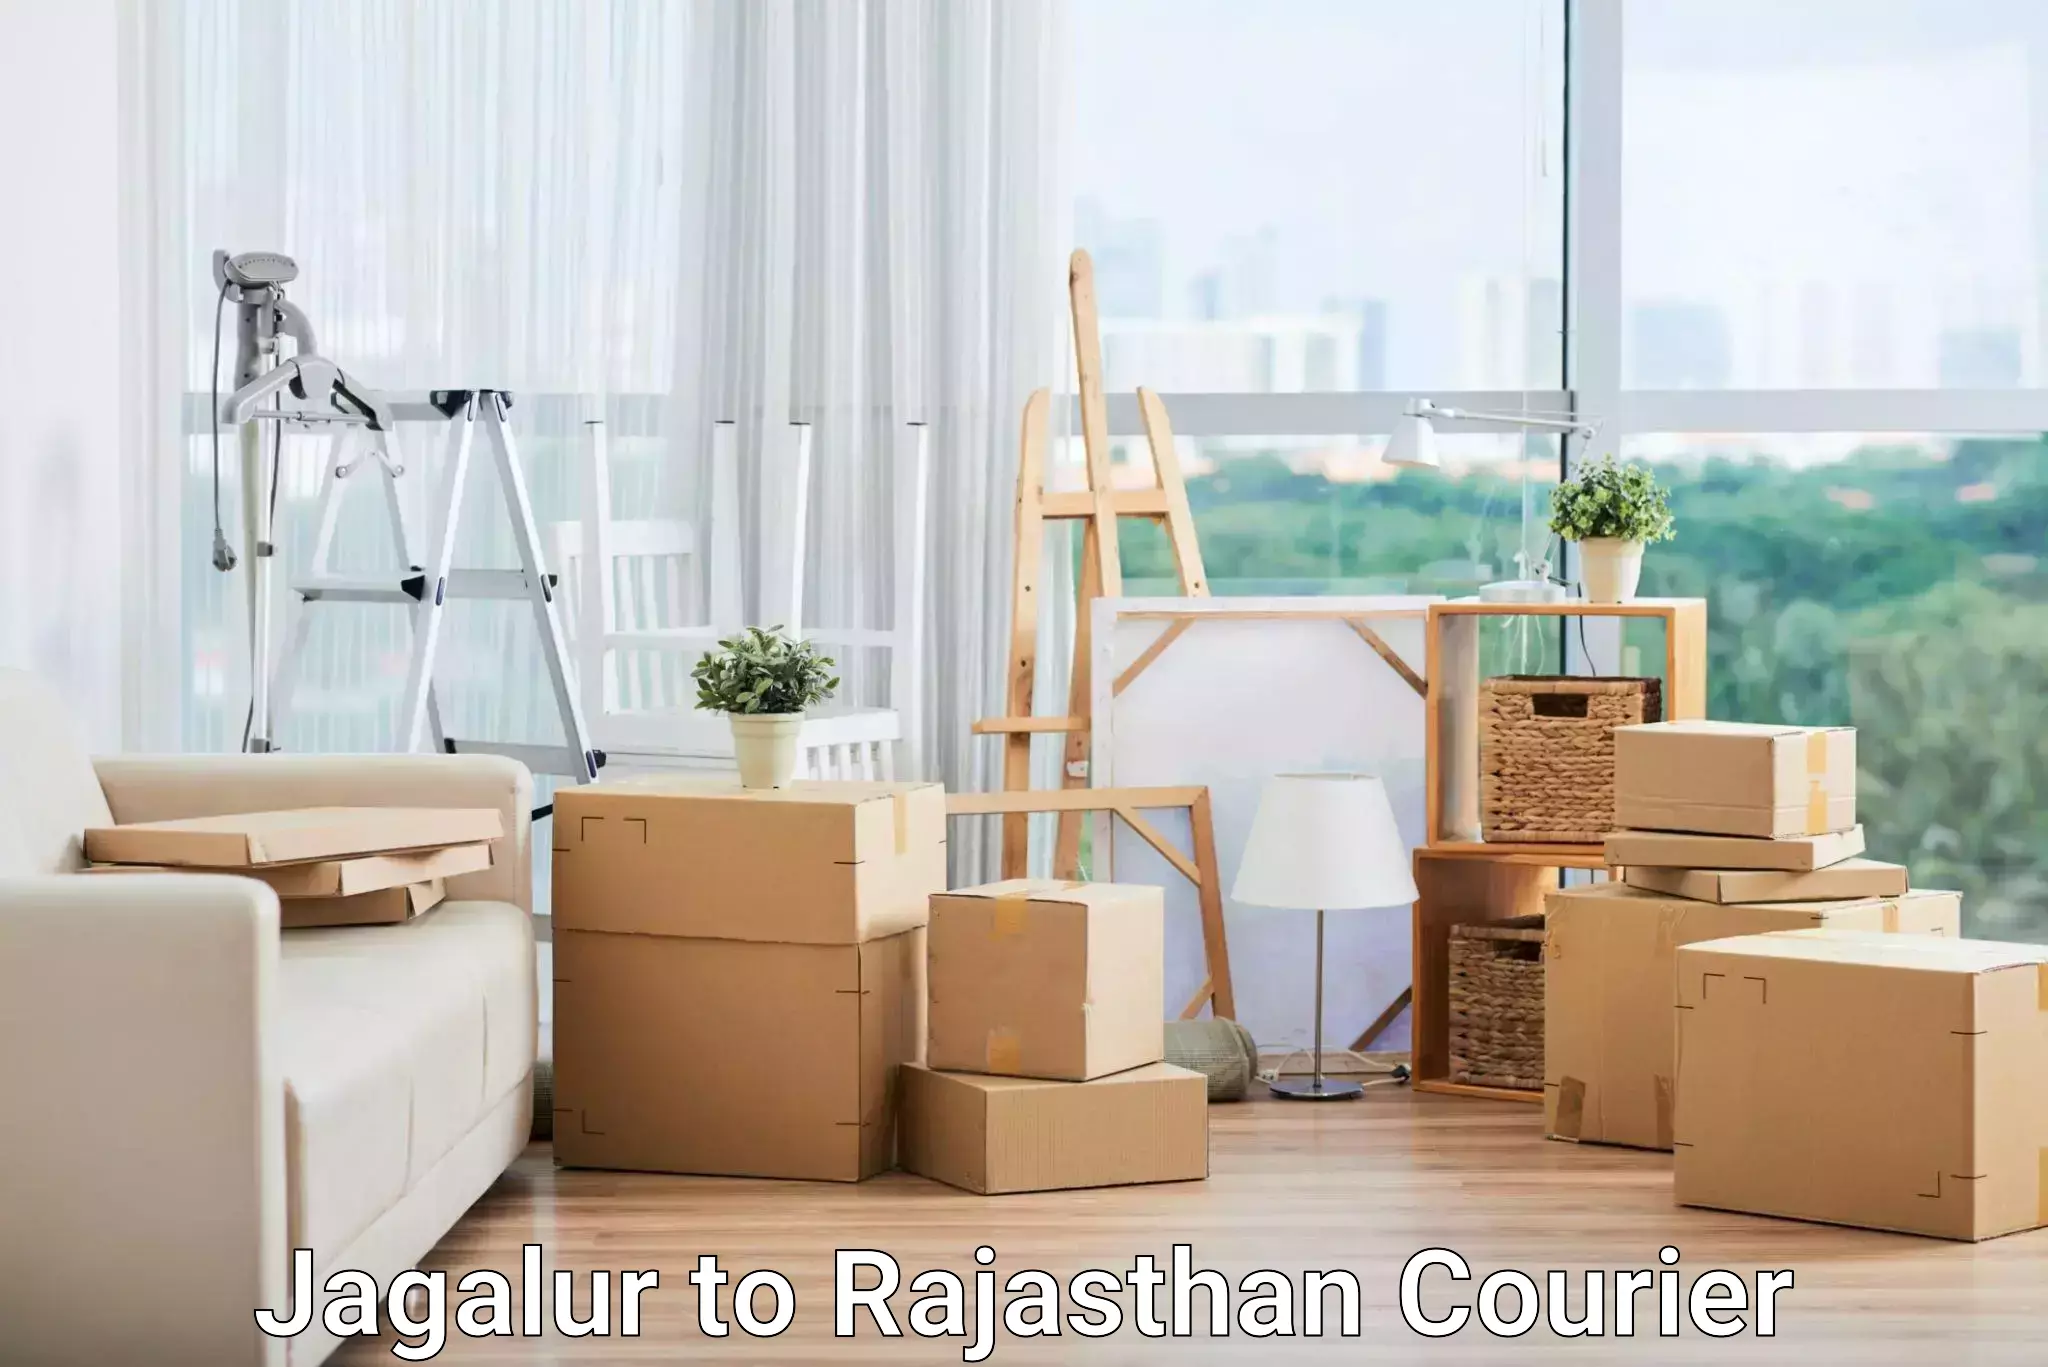 International courier networks Jagalur to Udaipur